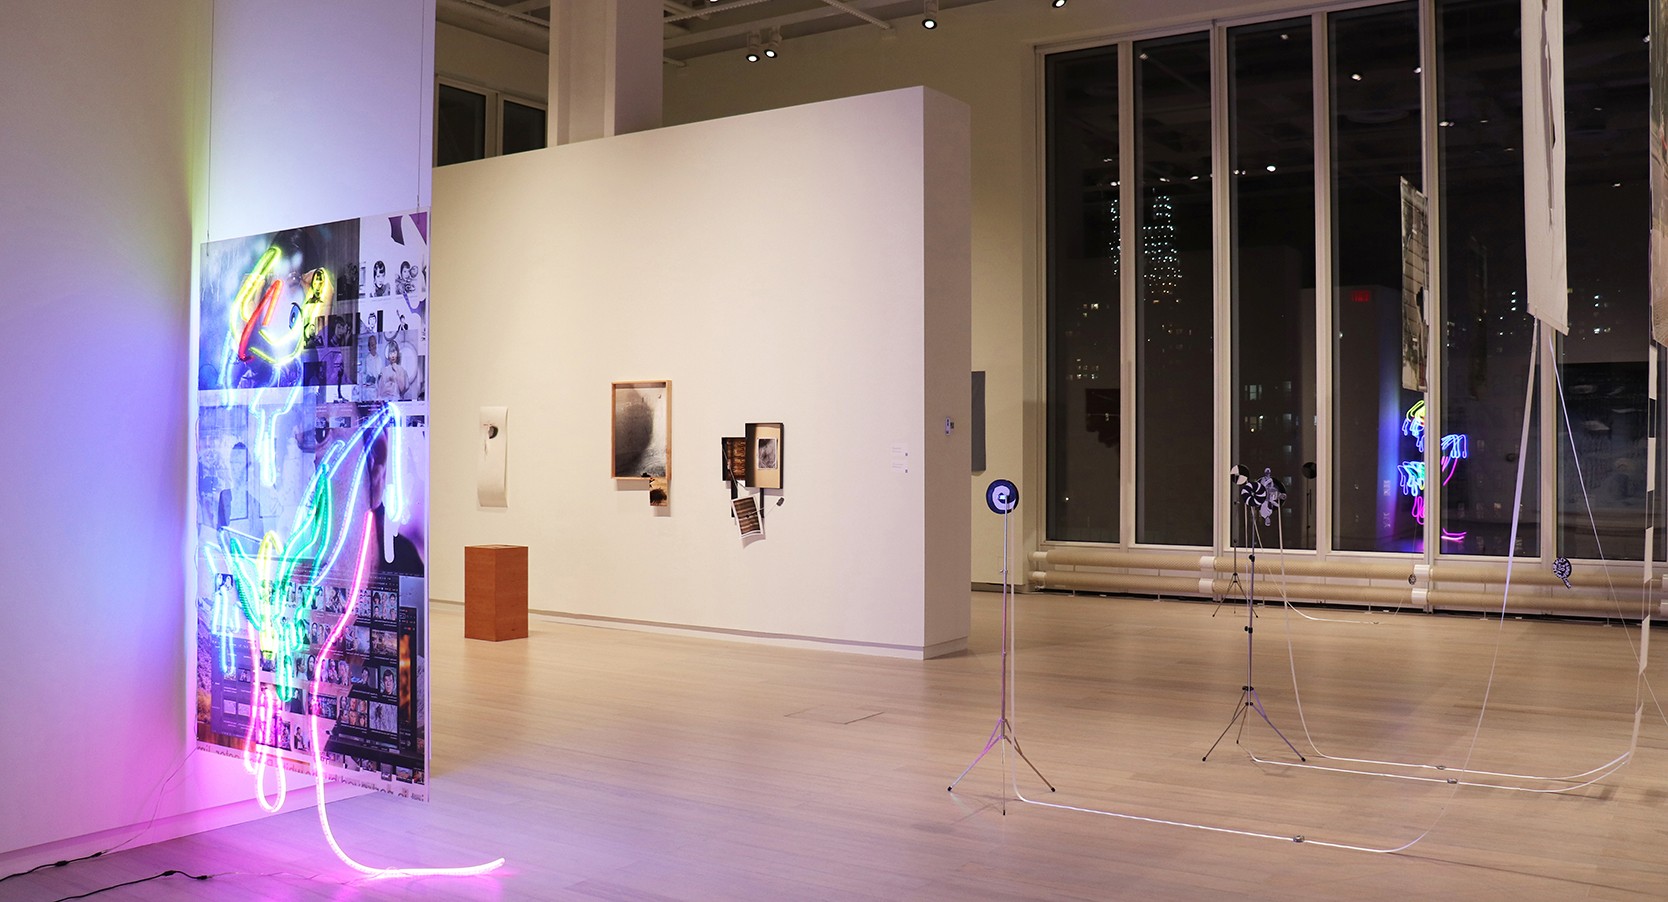 Installation view of the exhibition “MODA 2019: I/I CAN/I CANNOT/ I CANNOT VENTURE MYSELF” on view at the Wallach Art Gallery, Columbia University March 30, 2019 – April 14, 2019. Photo by Eddie Bartolomei.